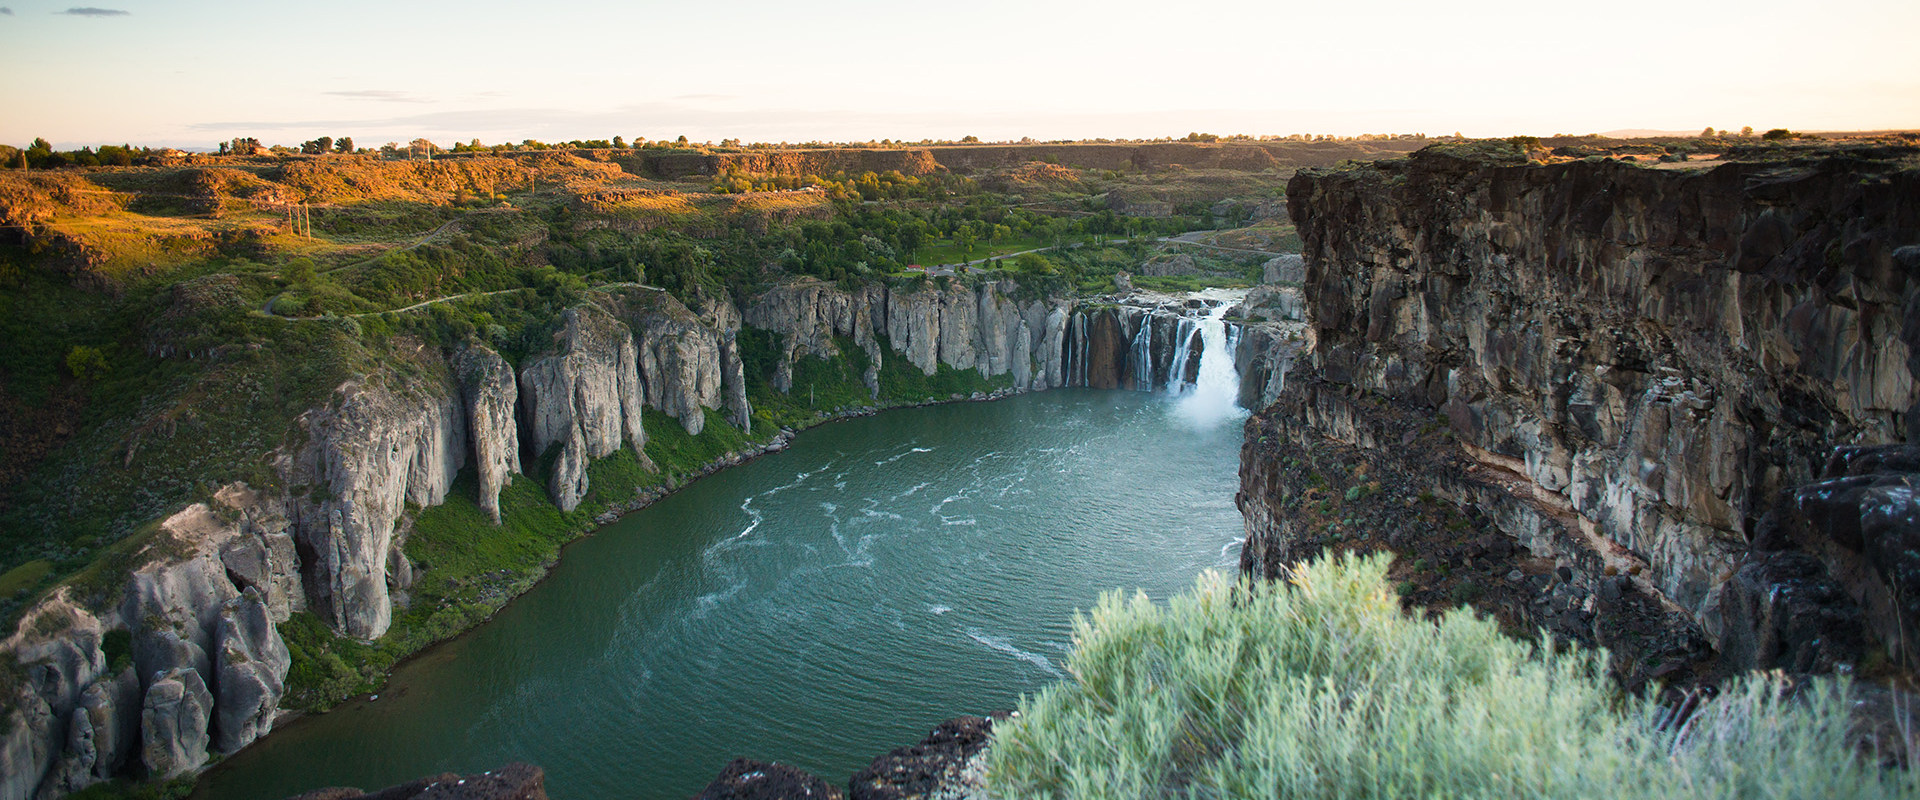 Exploring the Different Energy Resources in Post Falls, Idaho